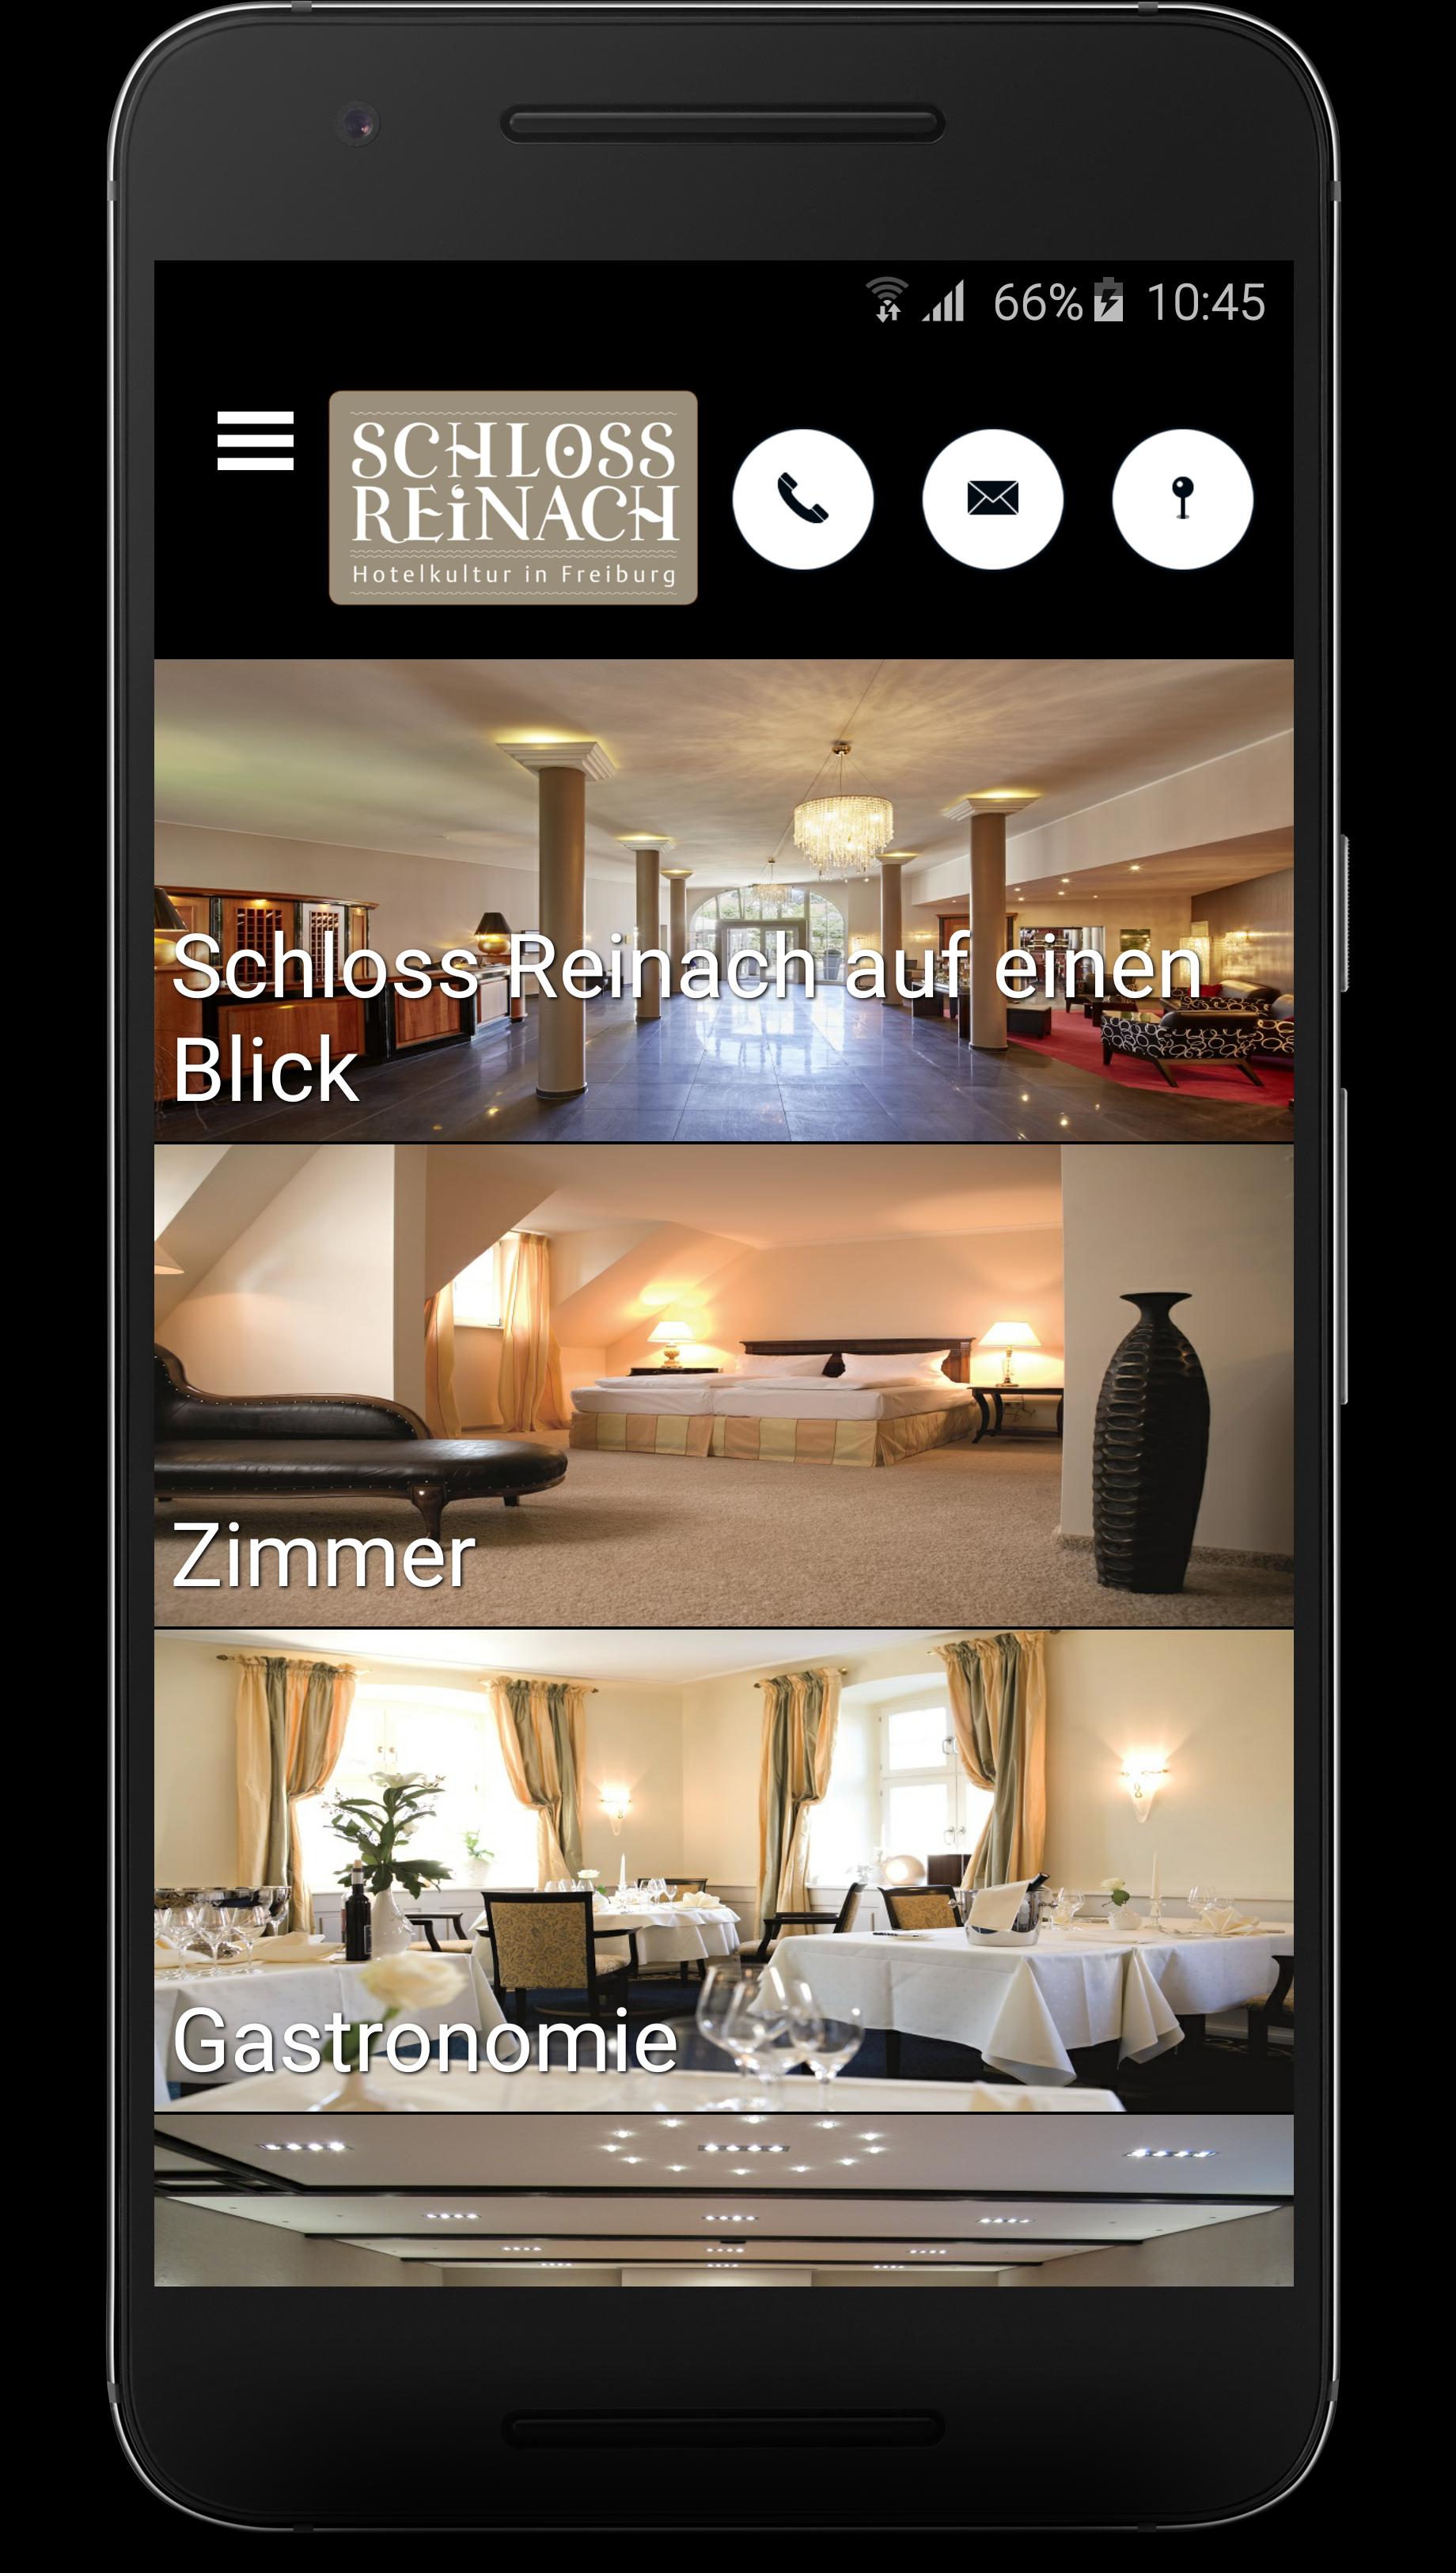 Hotel Schloss Reinach for Android - APK Download